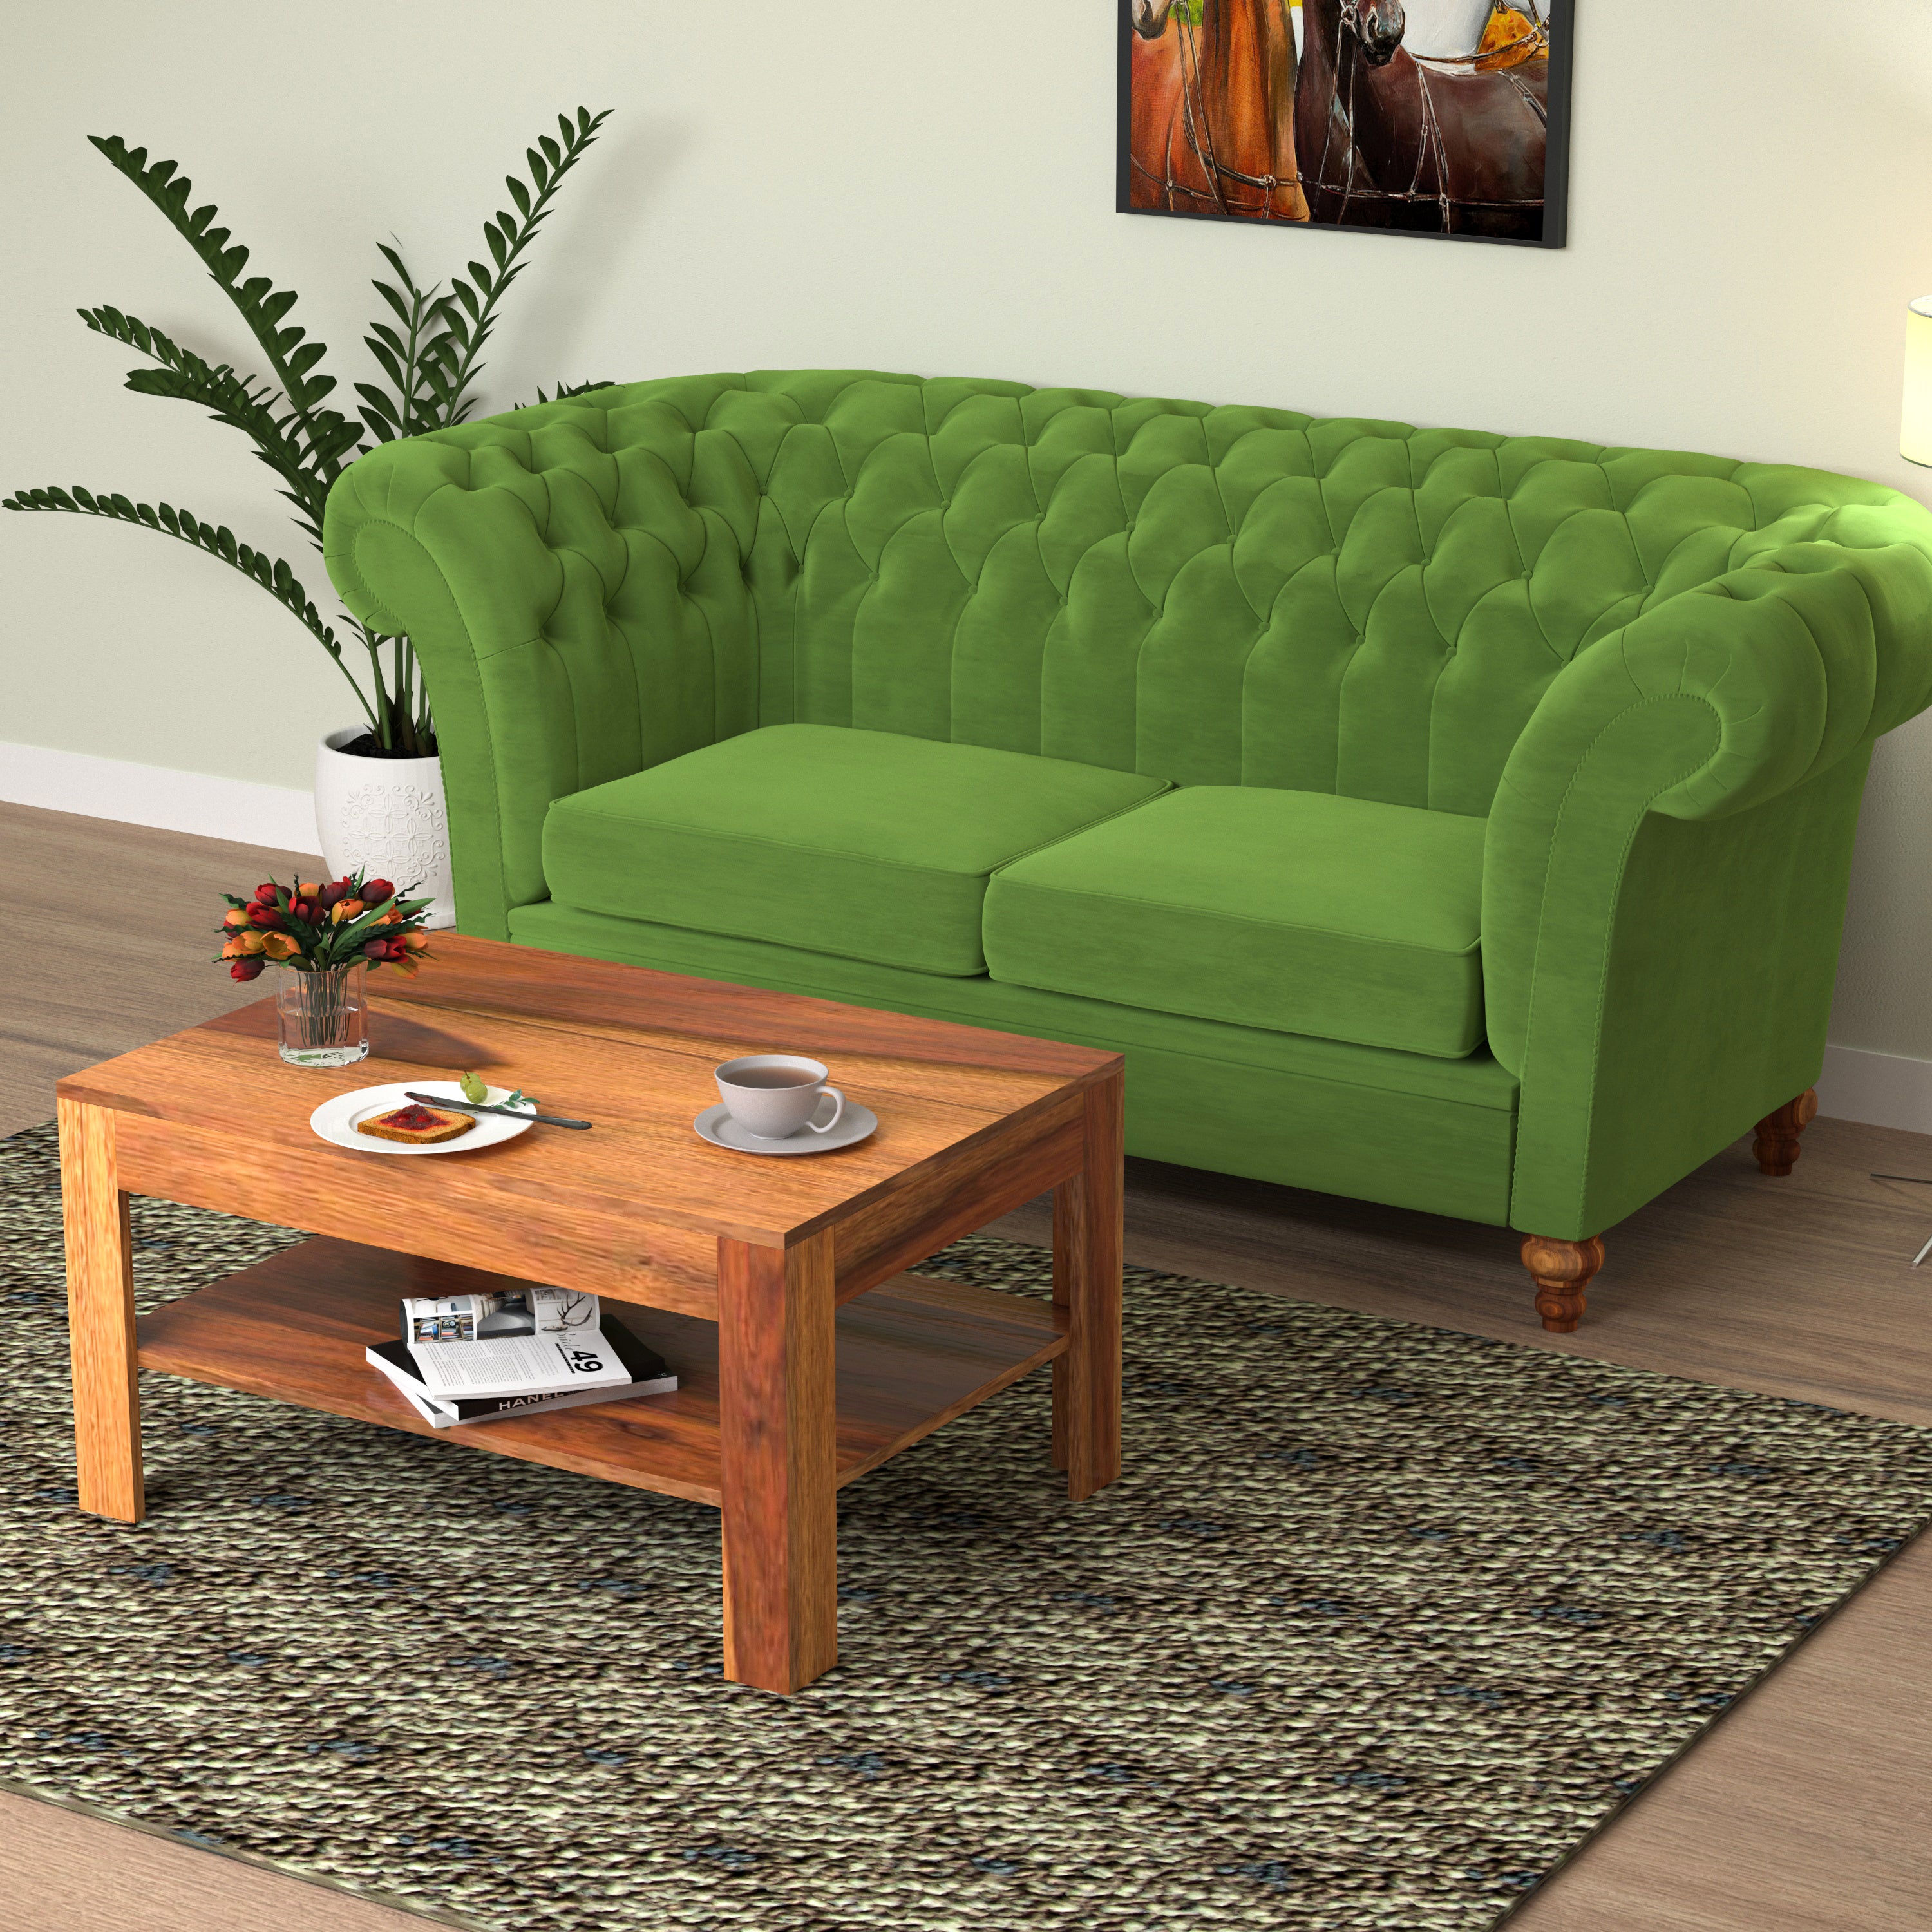 Parmanent Green Pastel Coloured Comfort Large 2 Seater Sofa for Home Sofa